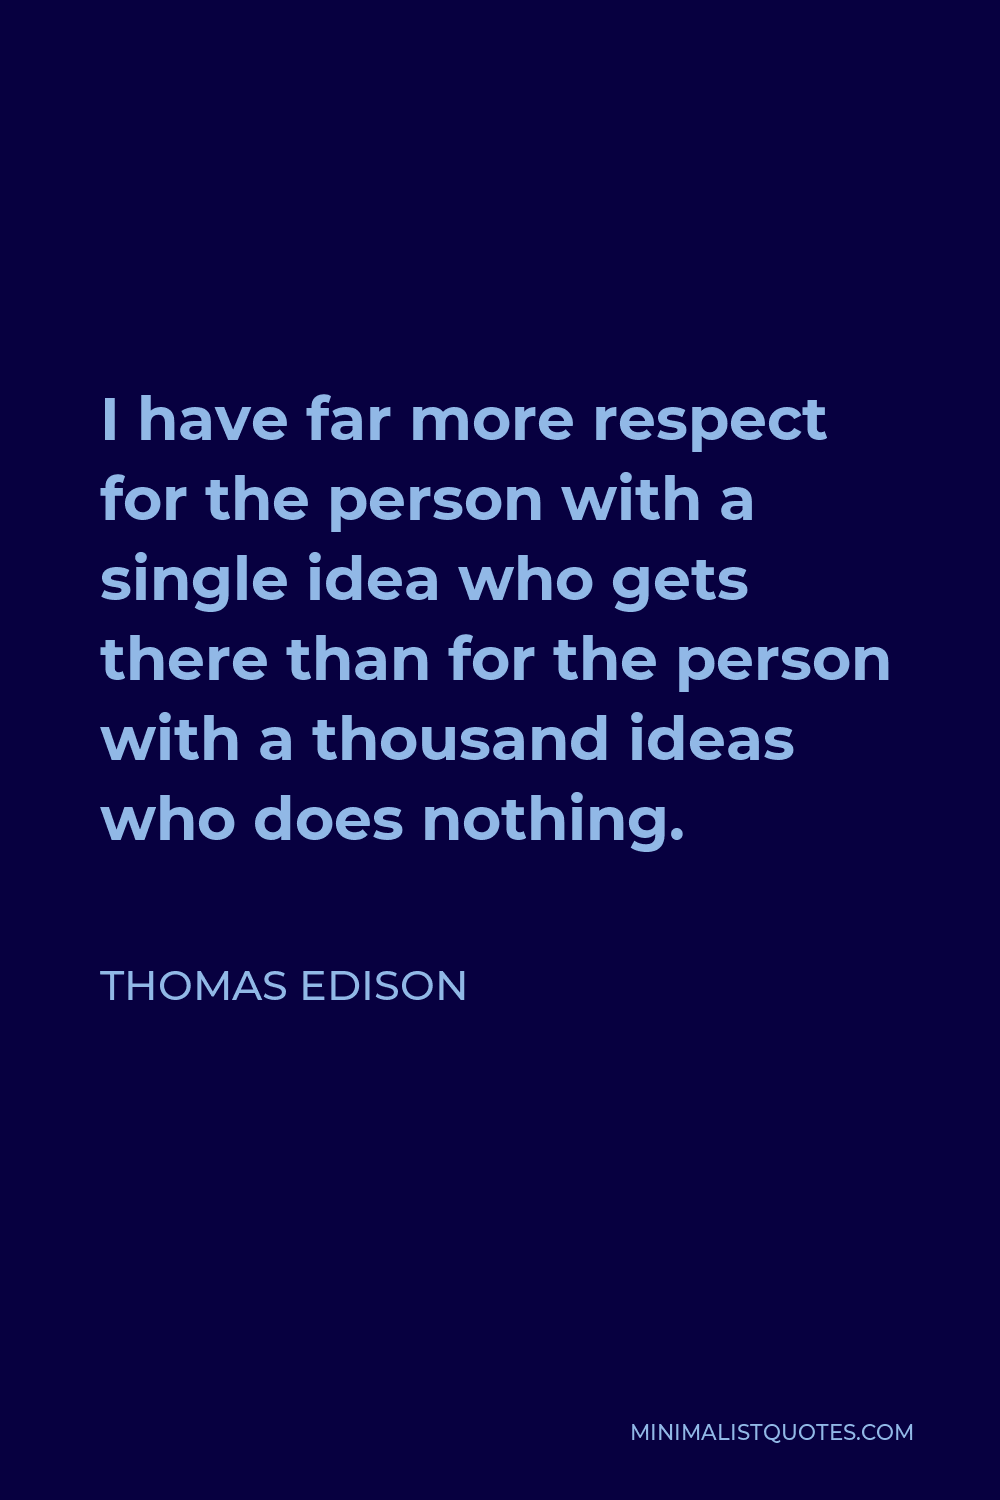 Thomas Edison Quote - I have far more respect for the person with a single idea who gets there than for the person with a thousand ideas who does nothing.